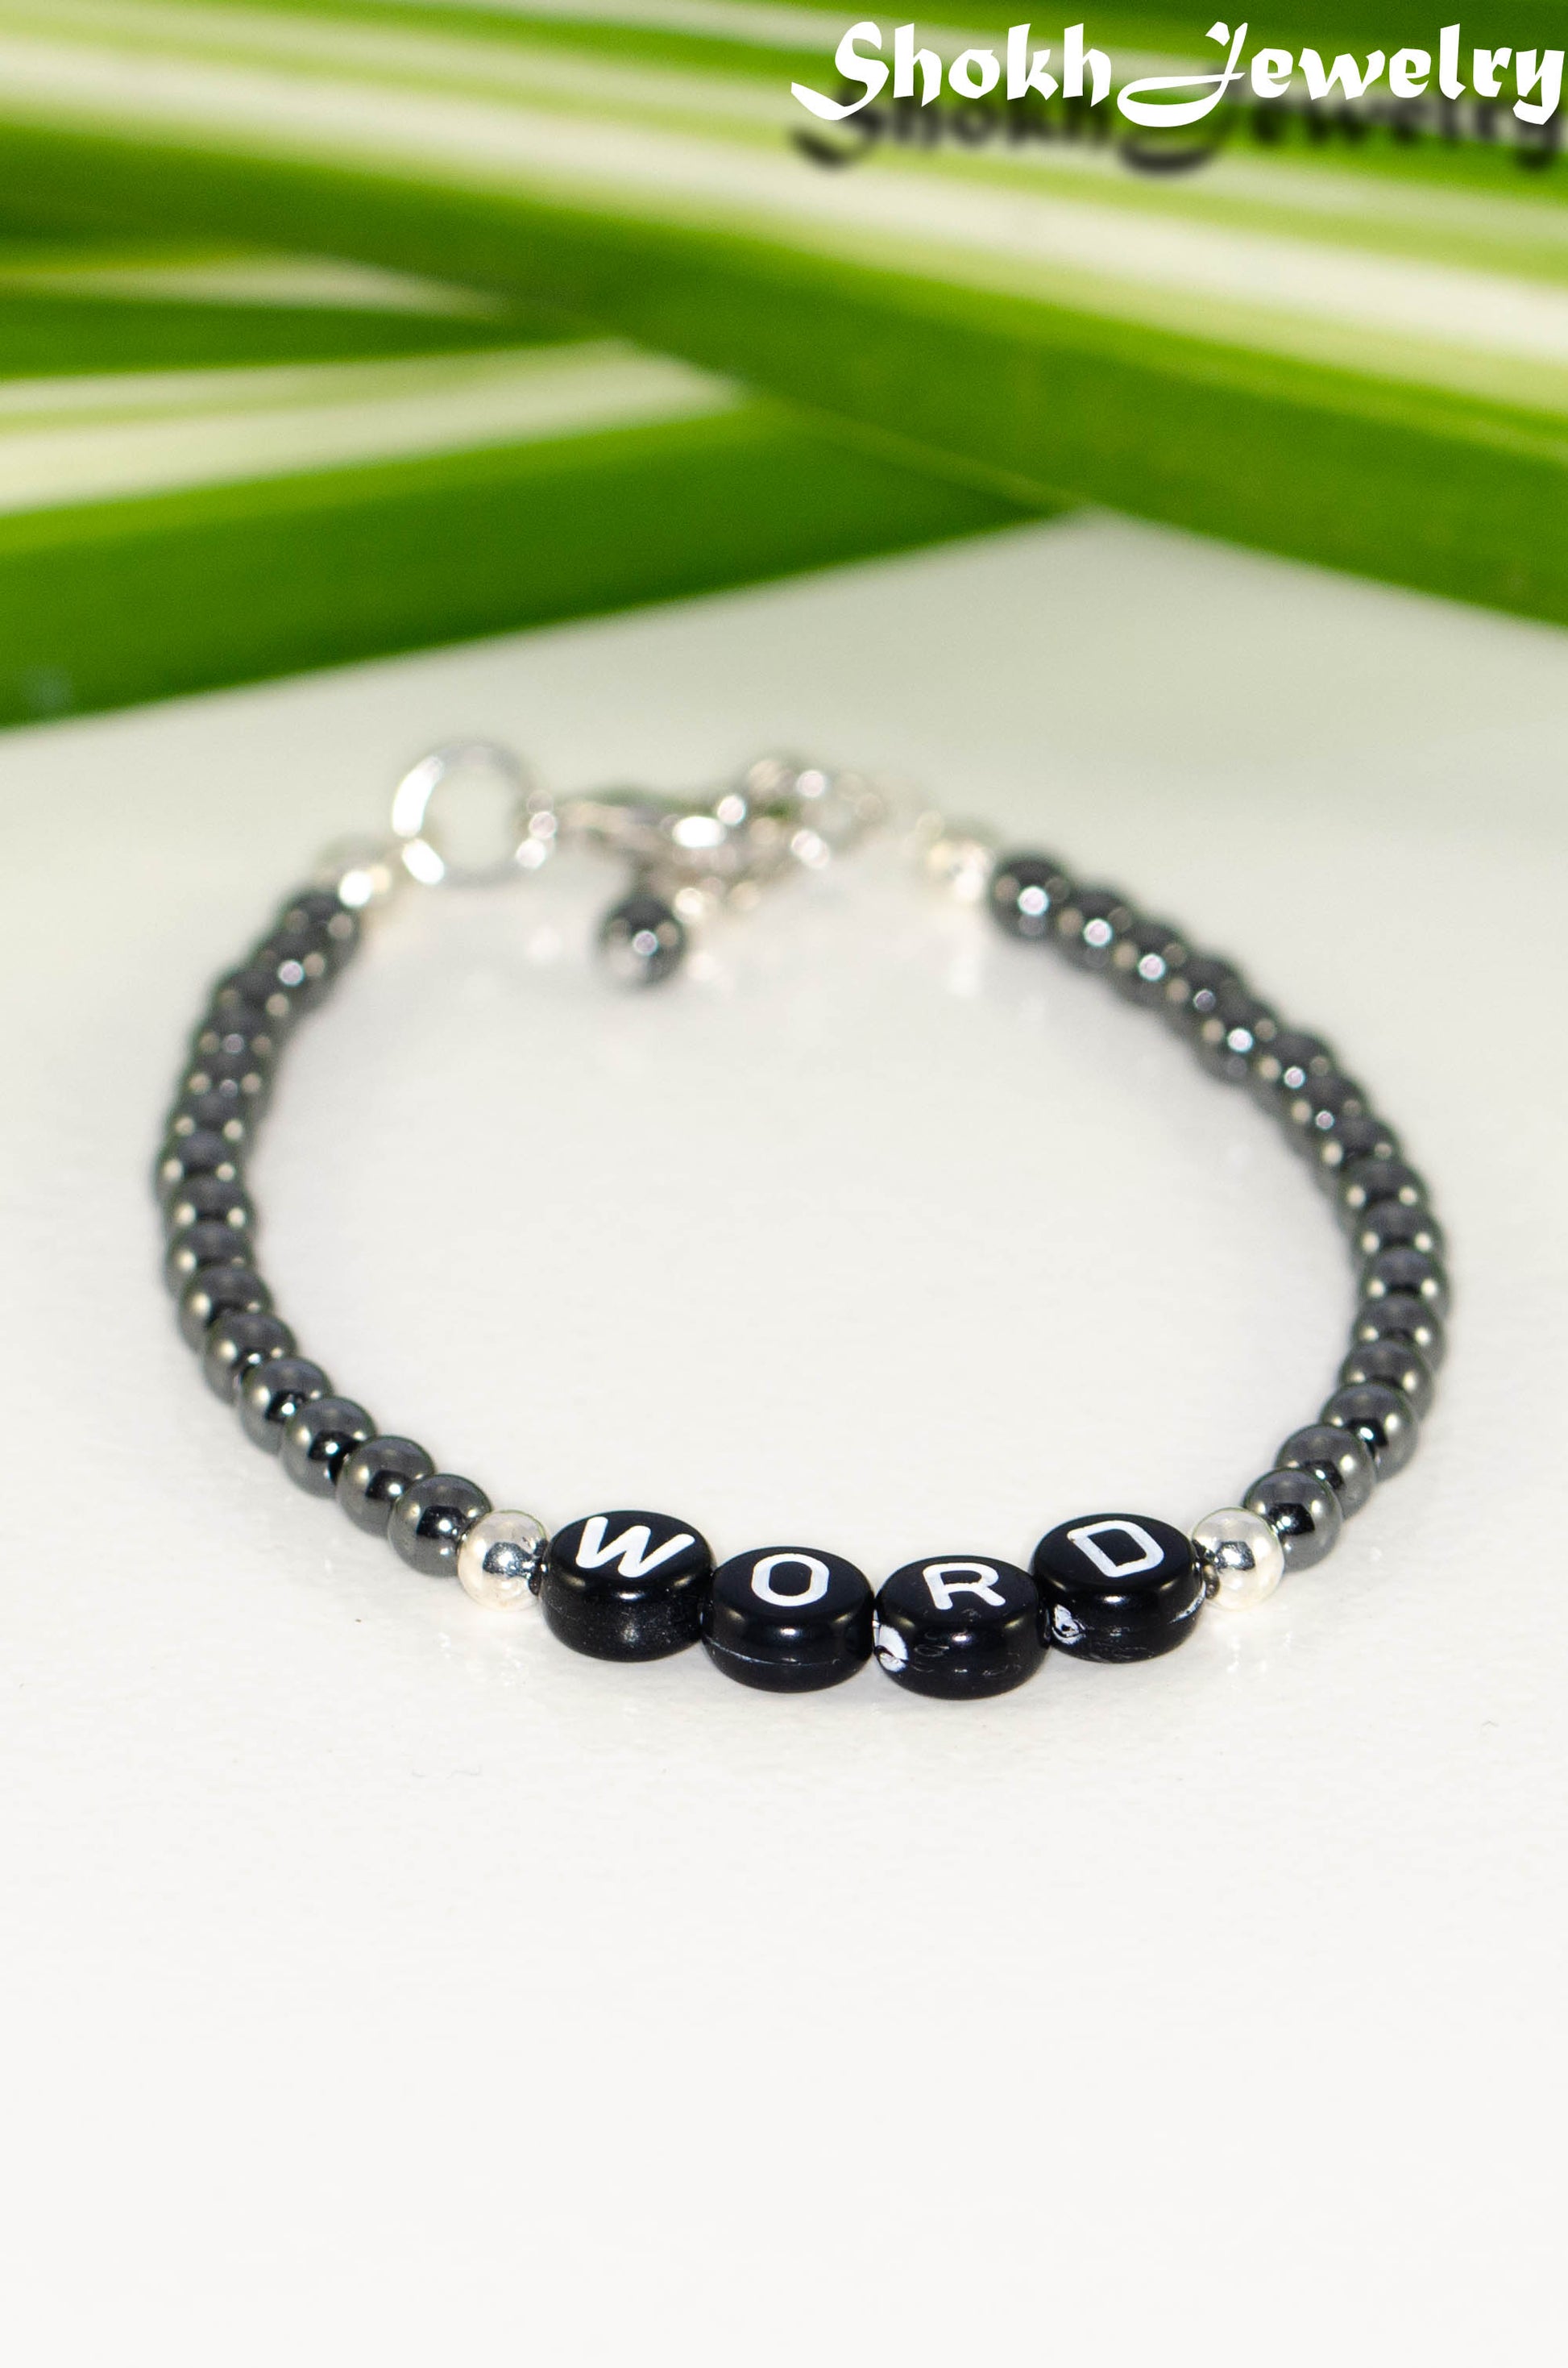 Close up of Personalized Hematite Stone Bracelet with Clasp.